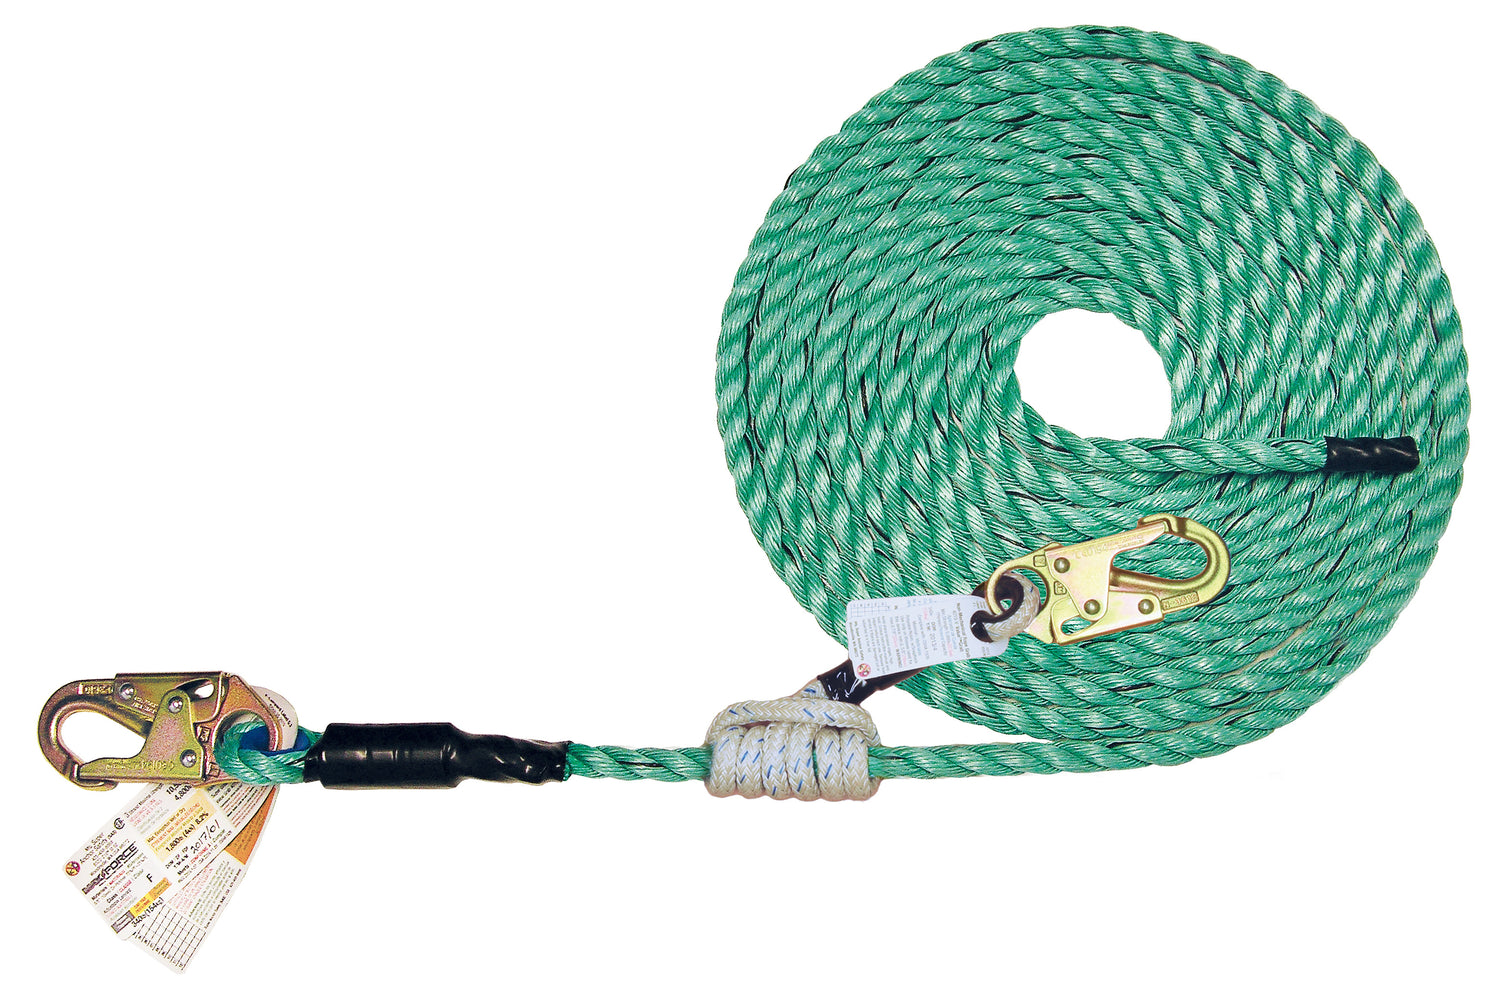 Super Anchor 25' Maxima Lifeline with Snaphook and Value Grab Prussic Rope Grab 4085-25V